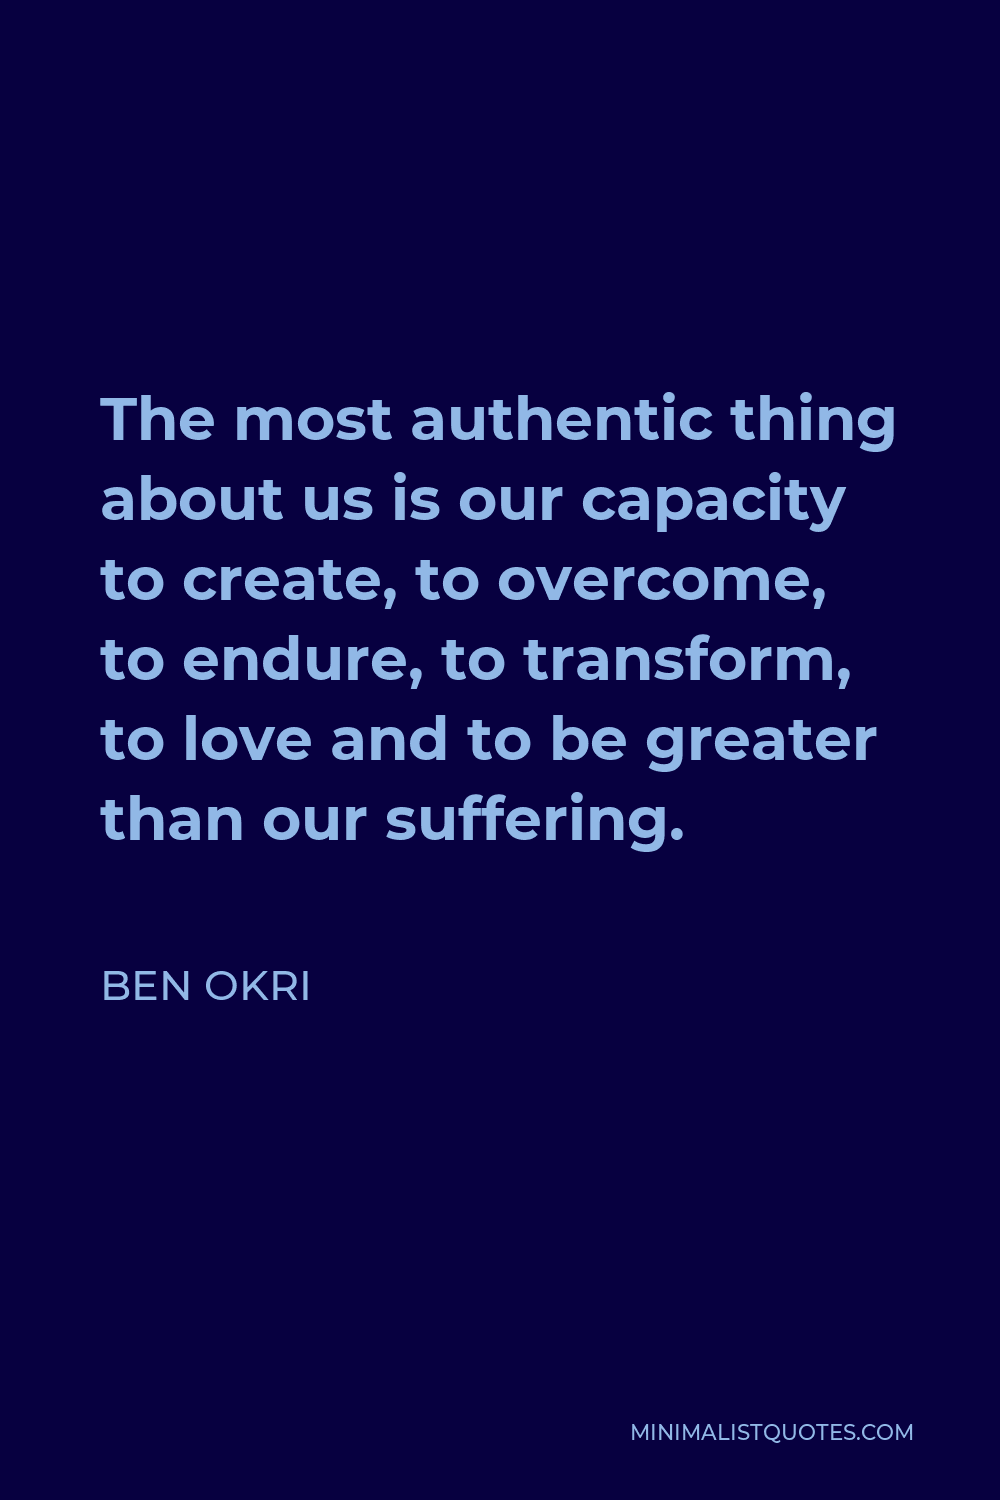 Ben Okri Quote - The most authentic thing about us is our capacity to create, to overcome, to endure, to transform, to love and to be greater than our suffering.